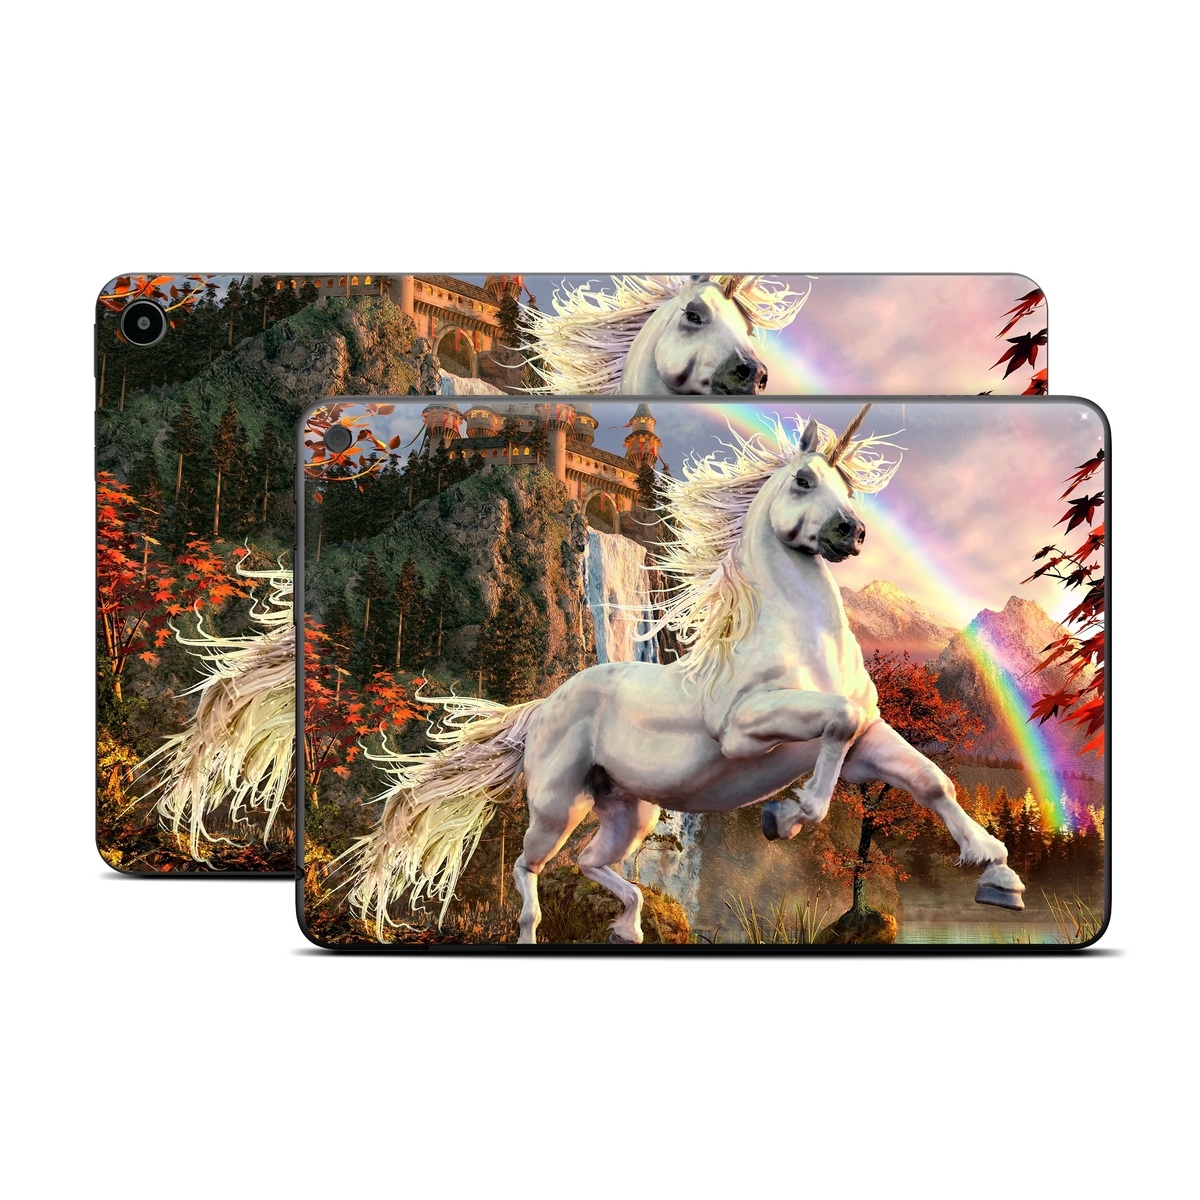 Amazon Fire Tablet Series Skin Skin design of Nature, Unicorn, Fictional character, Sky, Mythical creature, Mythology, Cg artwork, Horse, Mane, Wildlife, with black, gray, red, green, blue colors